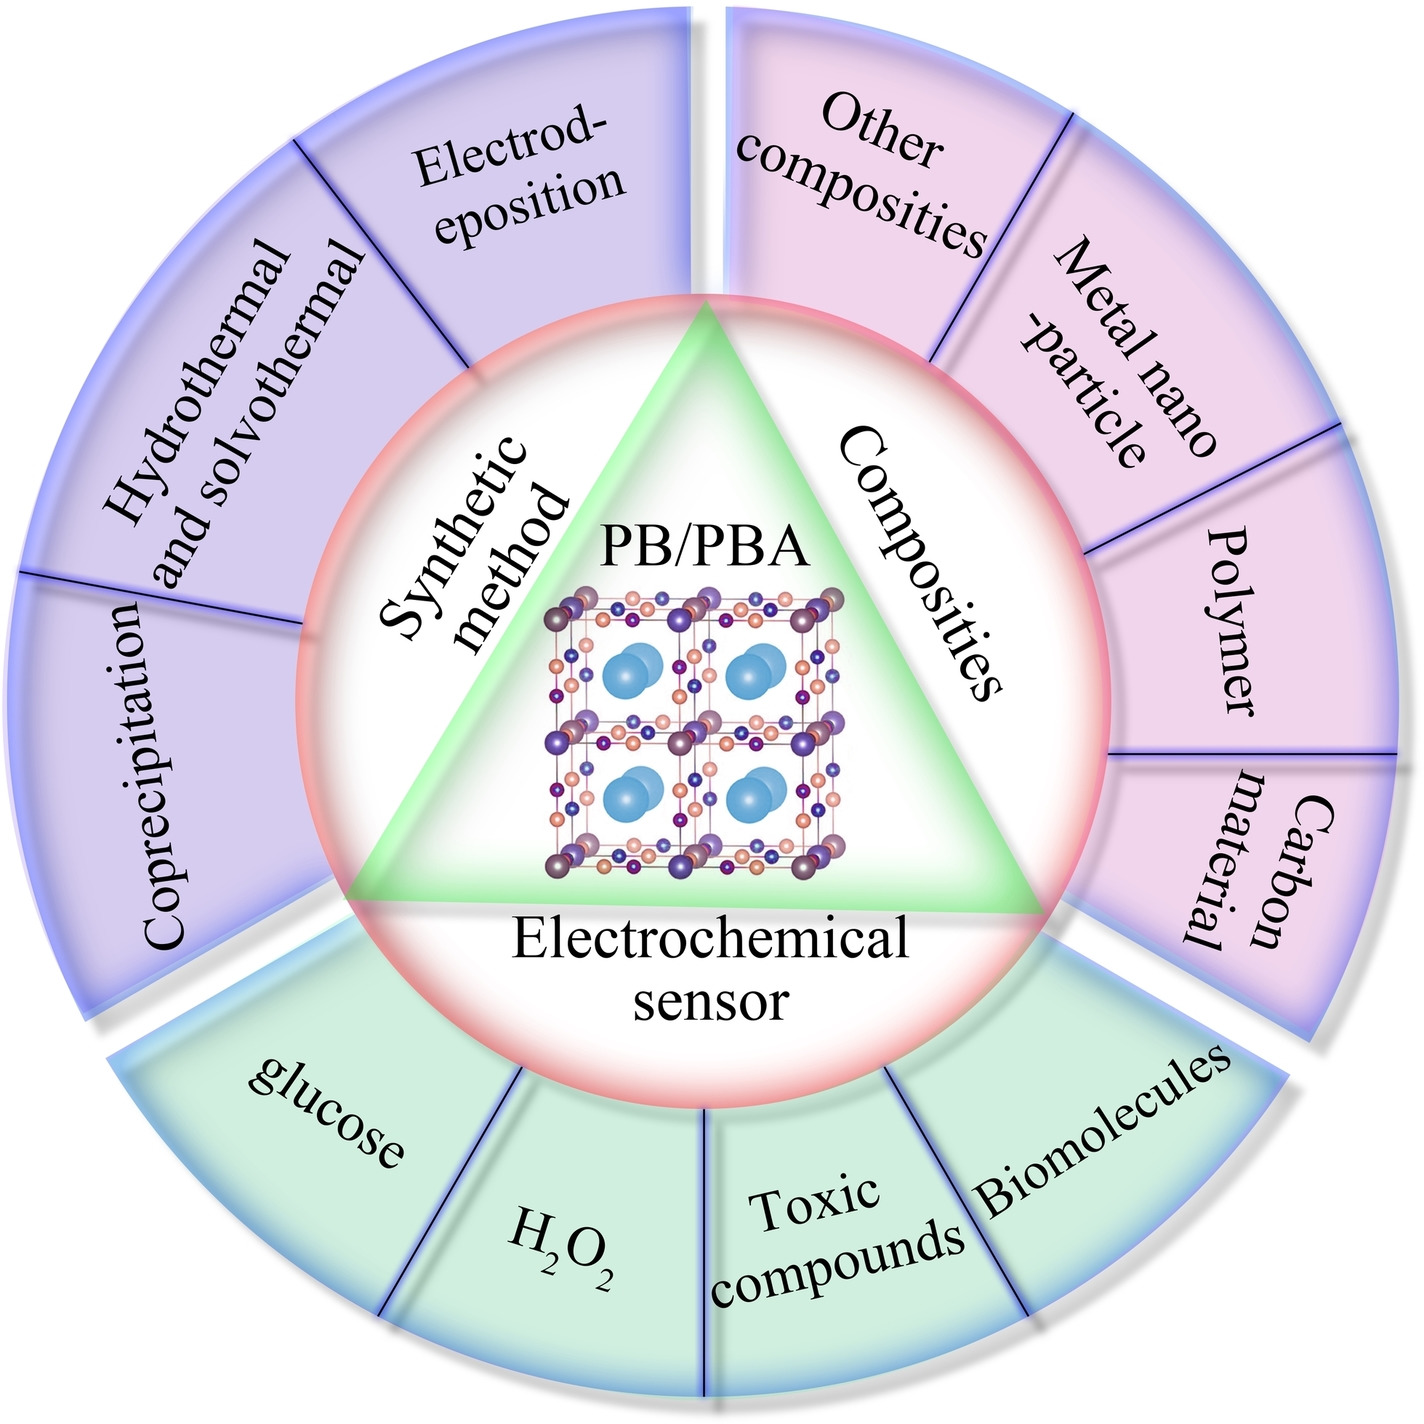 Synthesis and Applications of Prussian Blue and Its Analogues as Electrochemical Sensors